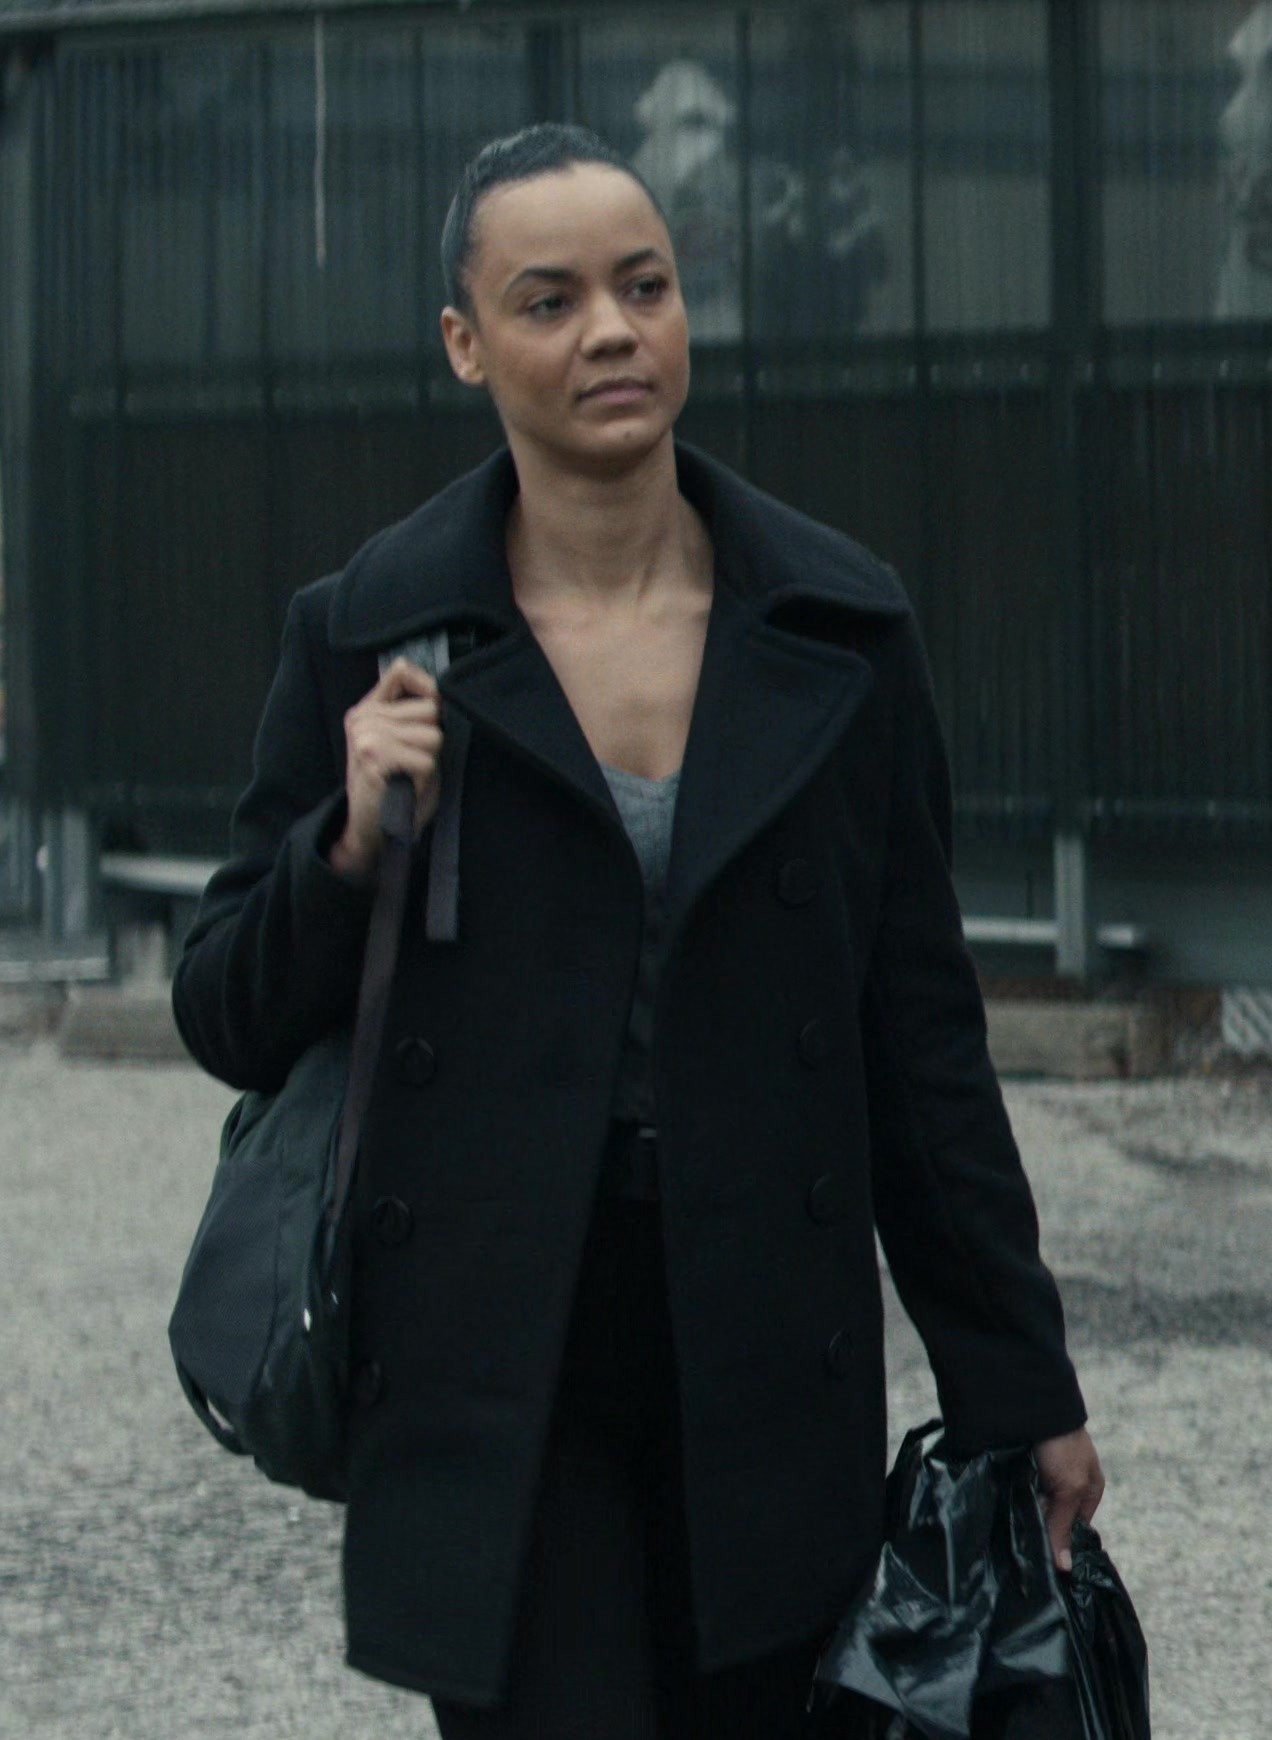 Worn on Reacher TV Show - Double-Breasted Black Peacoat Worn by Maria Sten as Frances Neagley